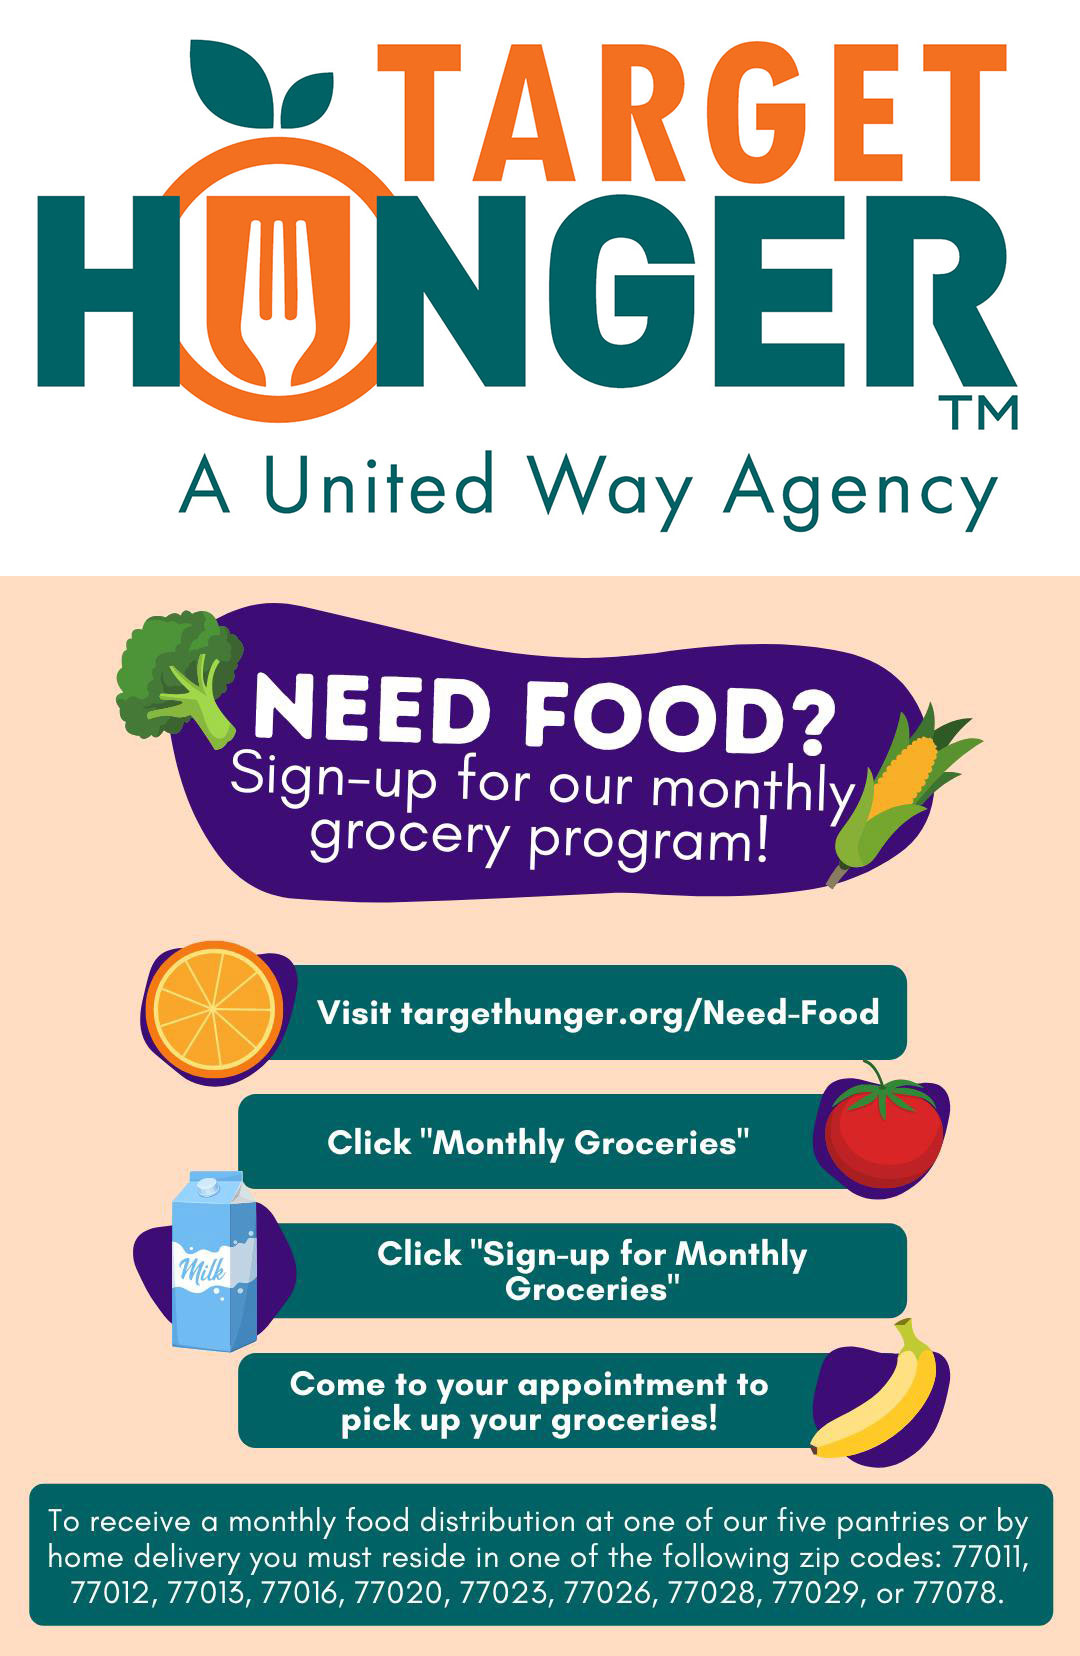 Target Hunger logo depicting an orange with a fork inside, along with information on signing up for Target Food's monthly grocery program.